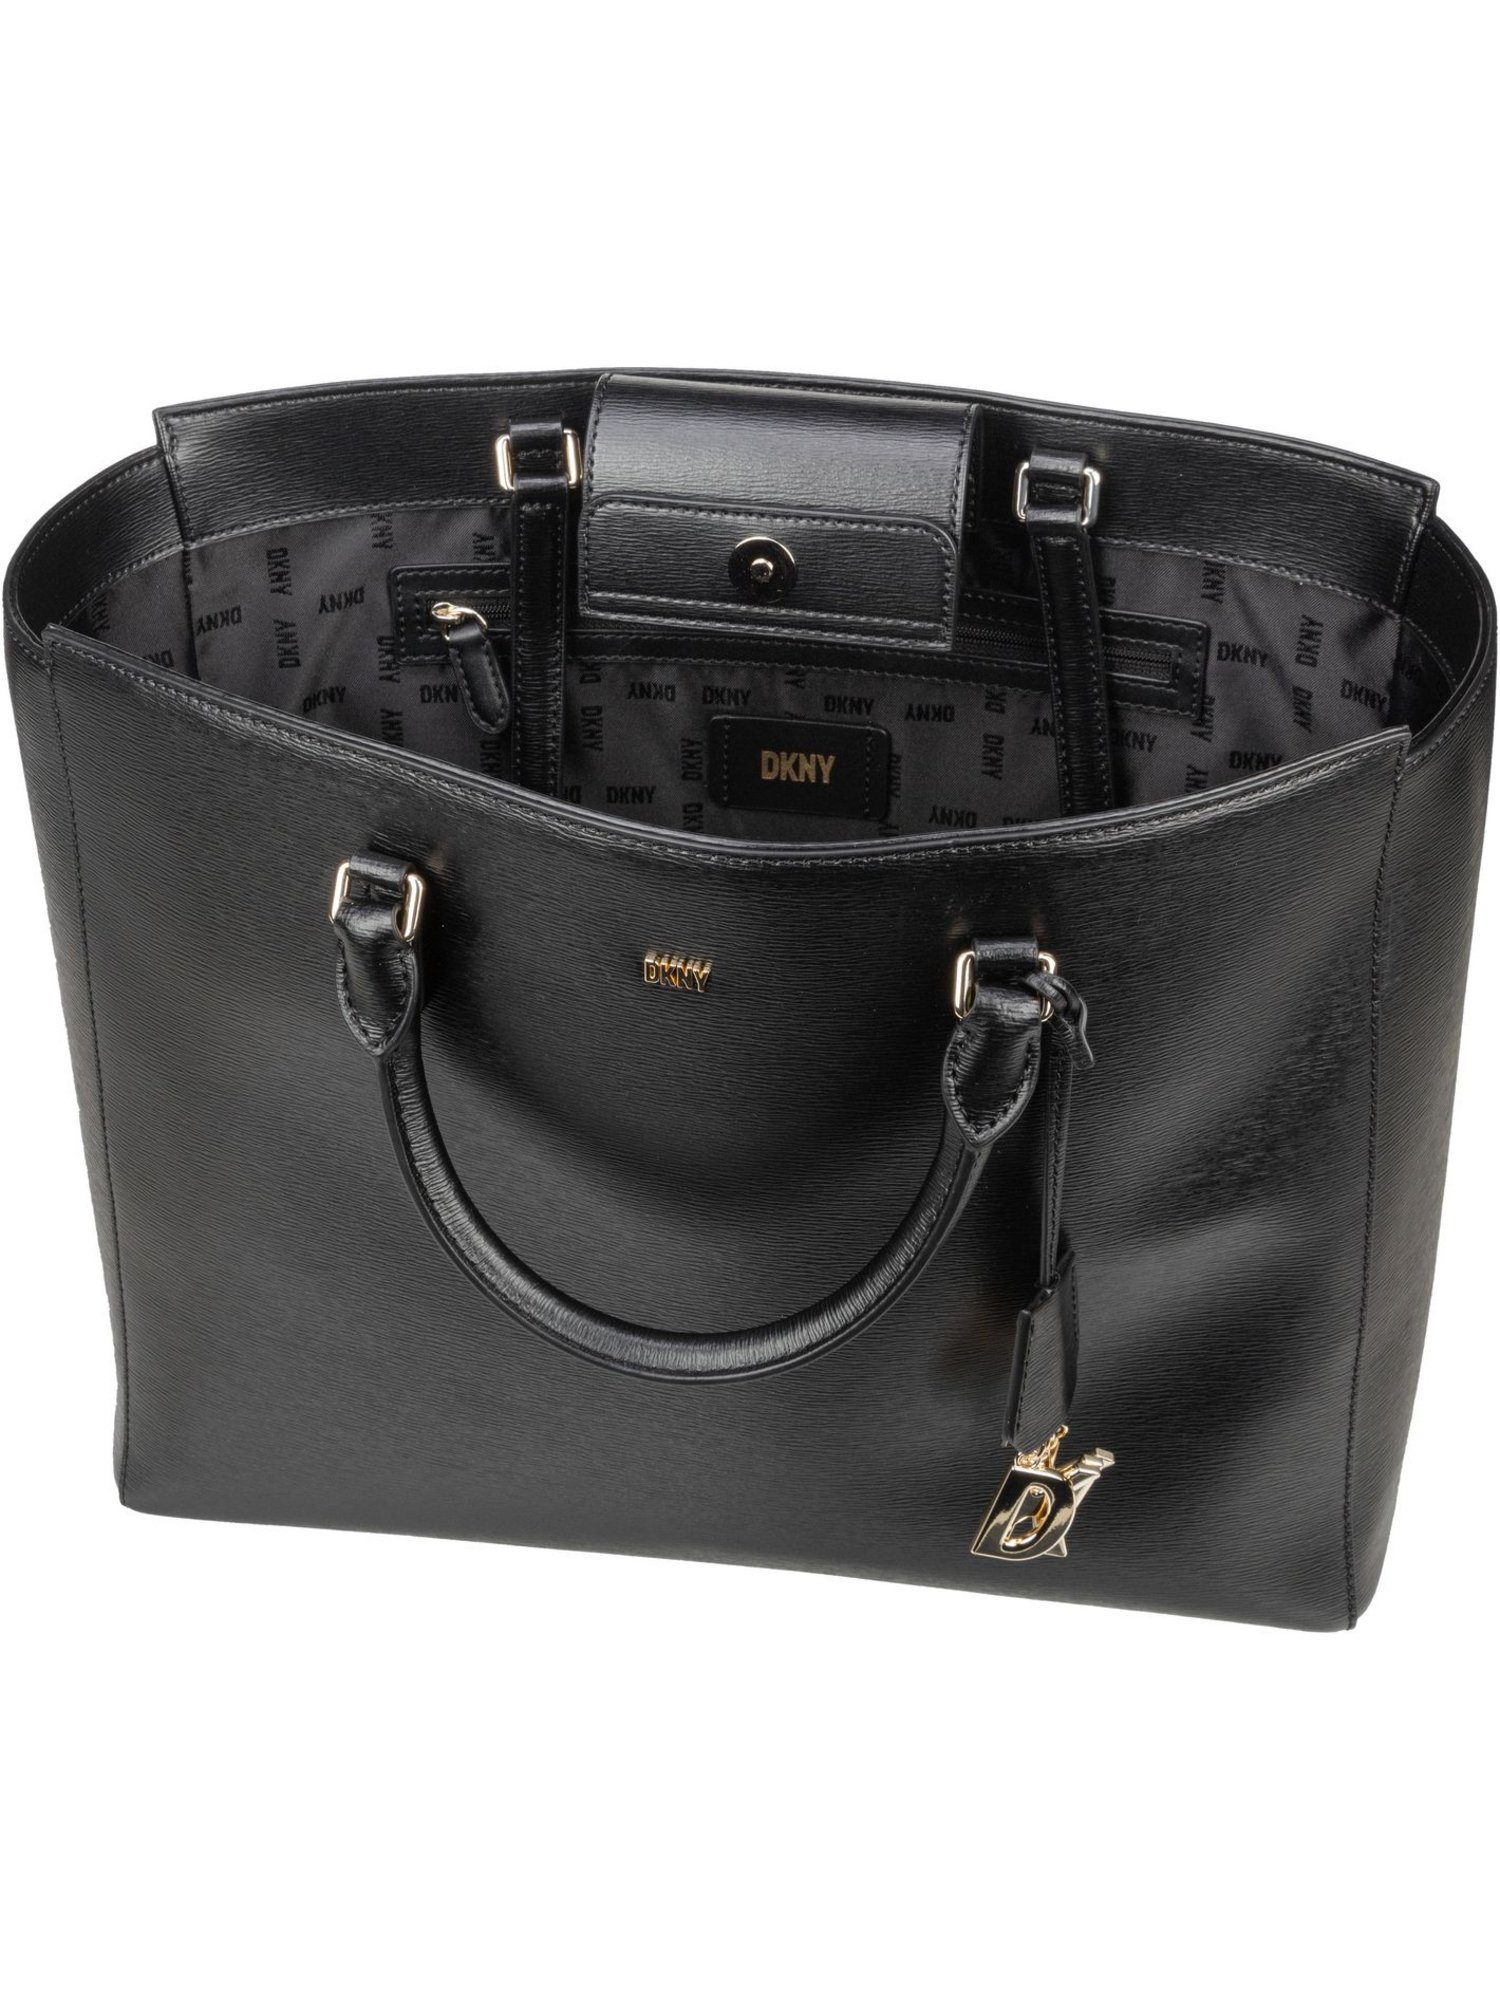 DKNY Shopper Paige Sutton Tote Book Leather